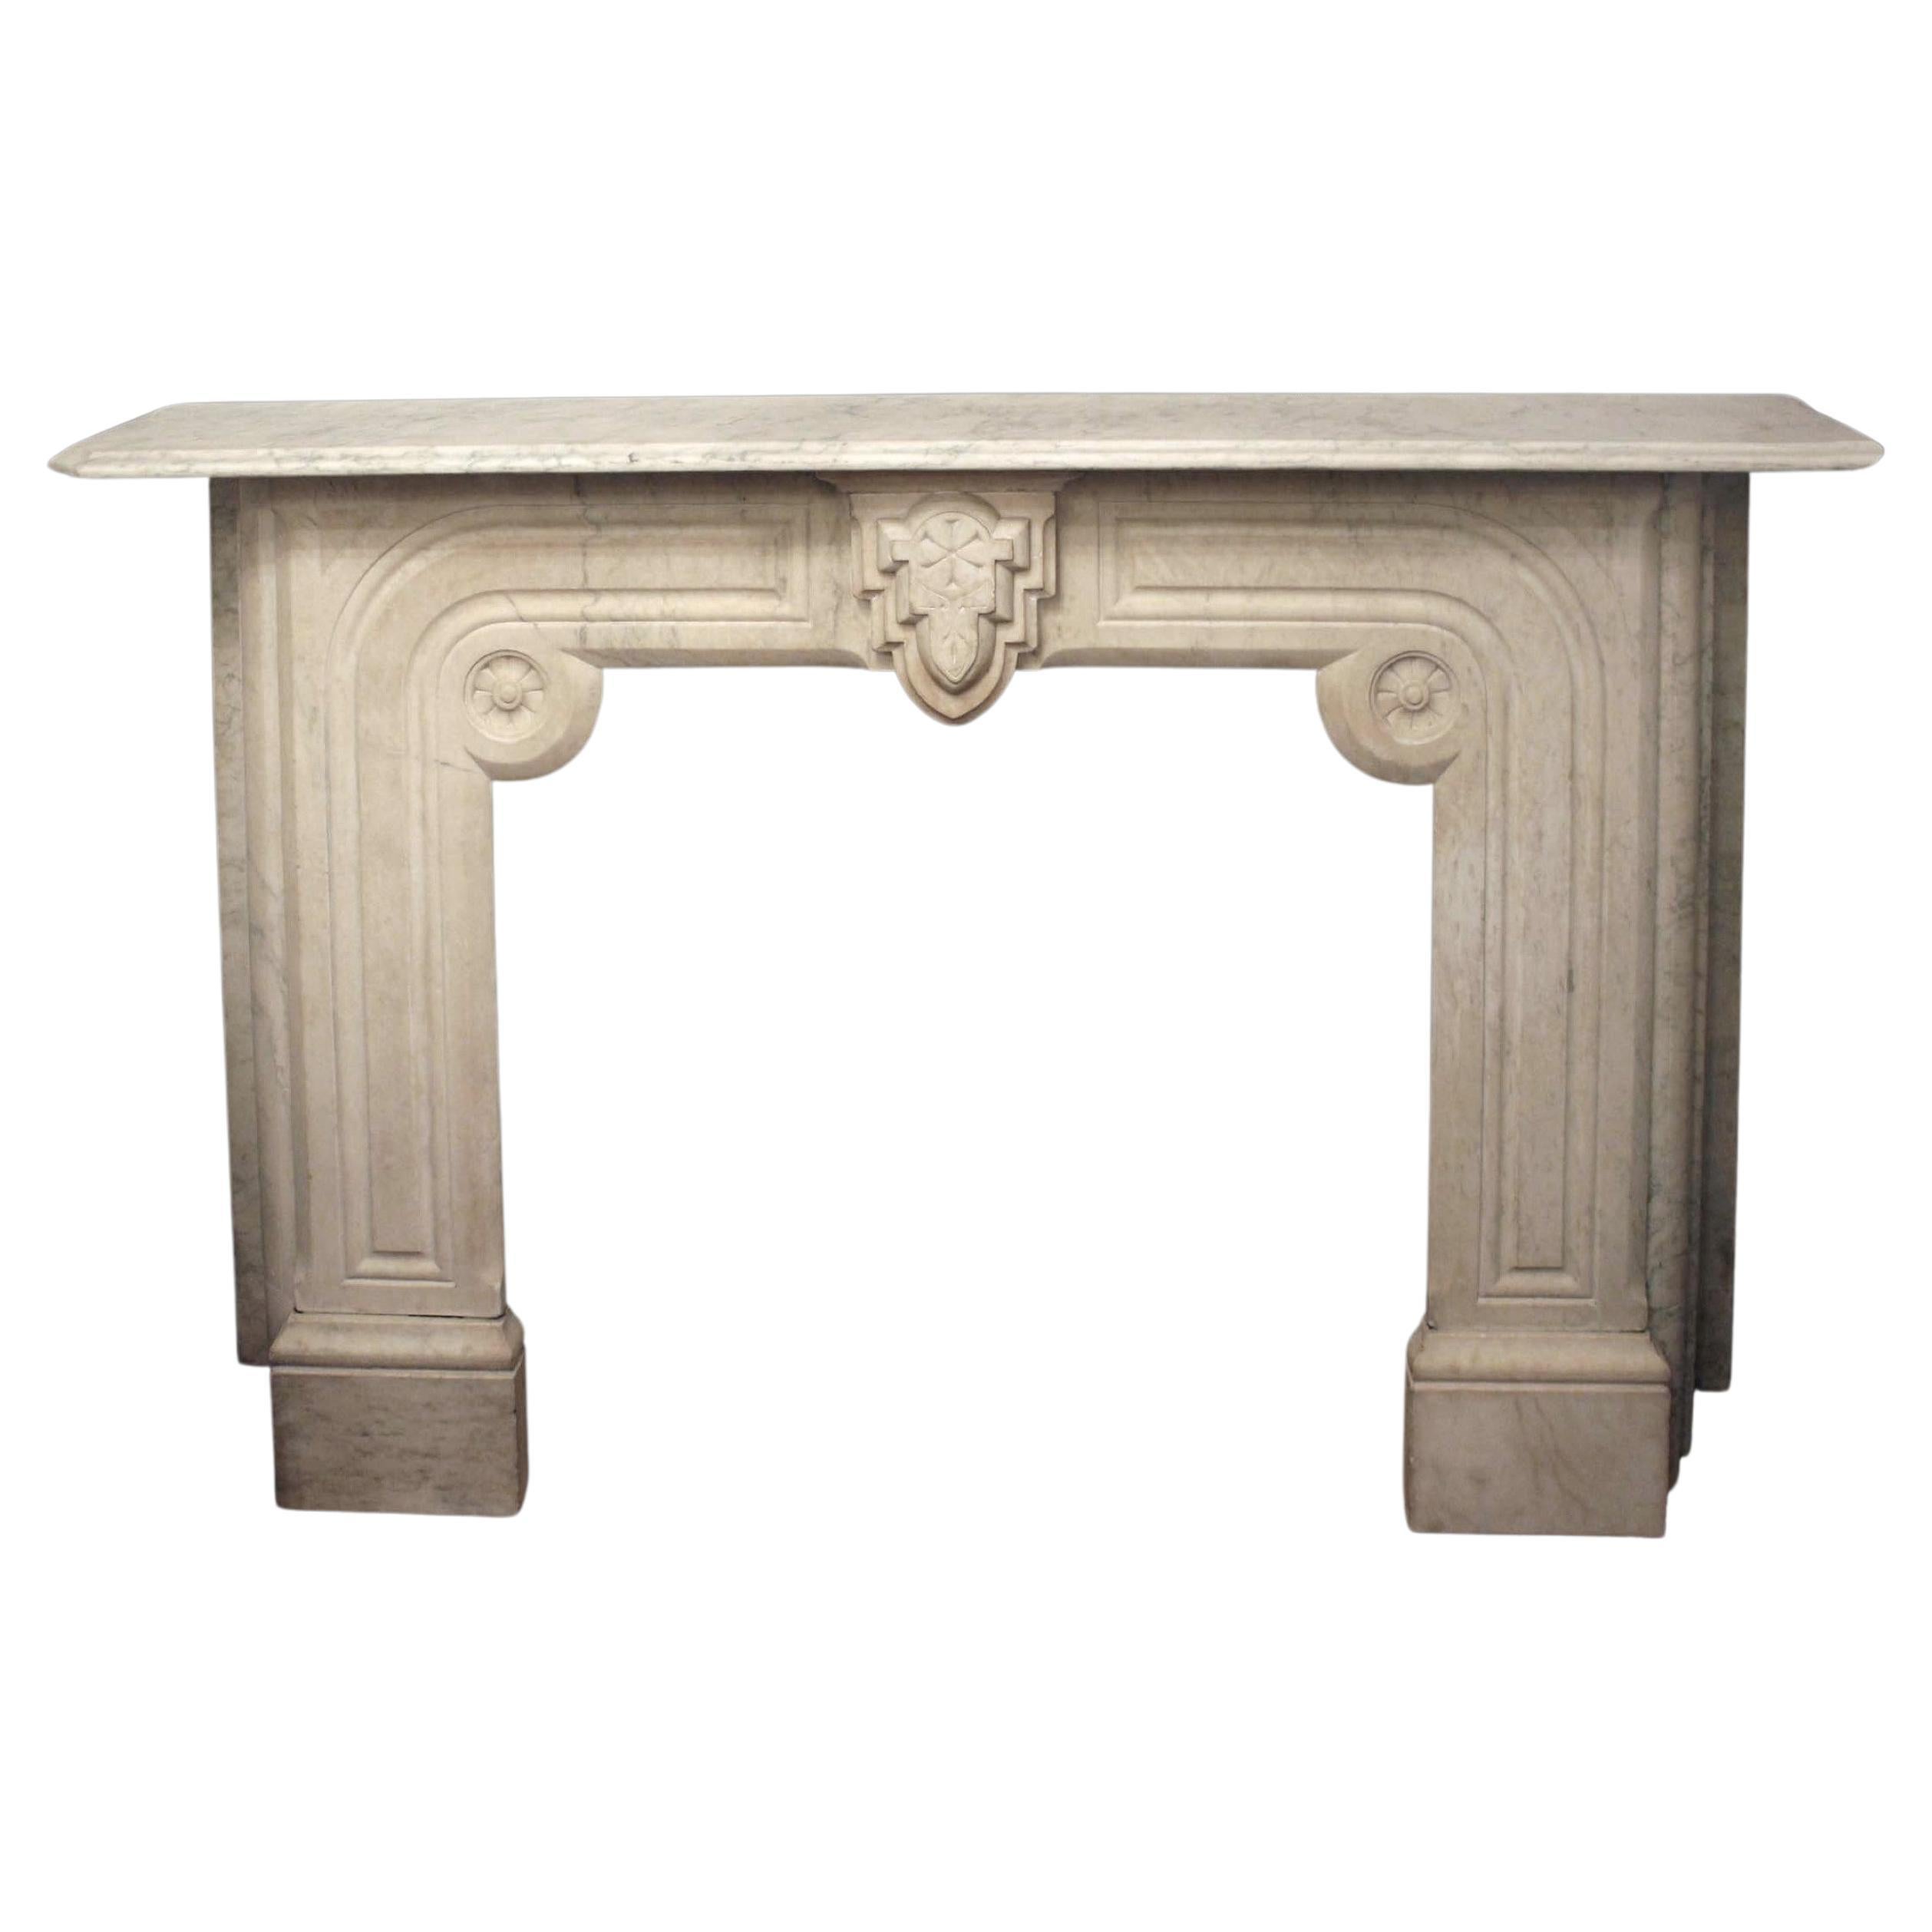 1920s Hand Carved Marble Mantel Geometric Floral Details